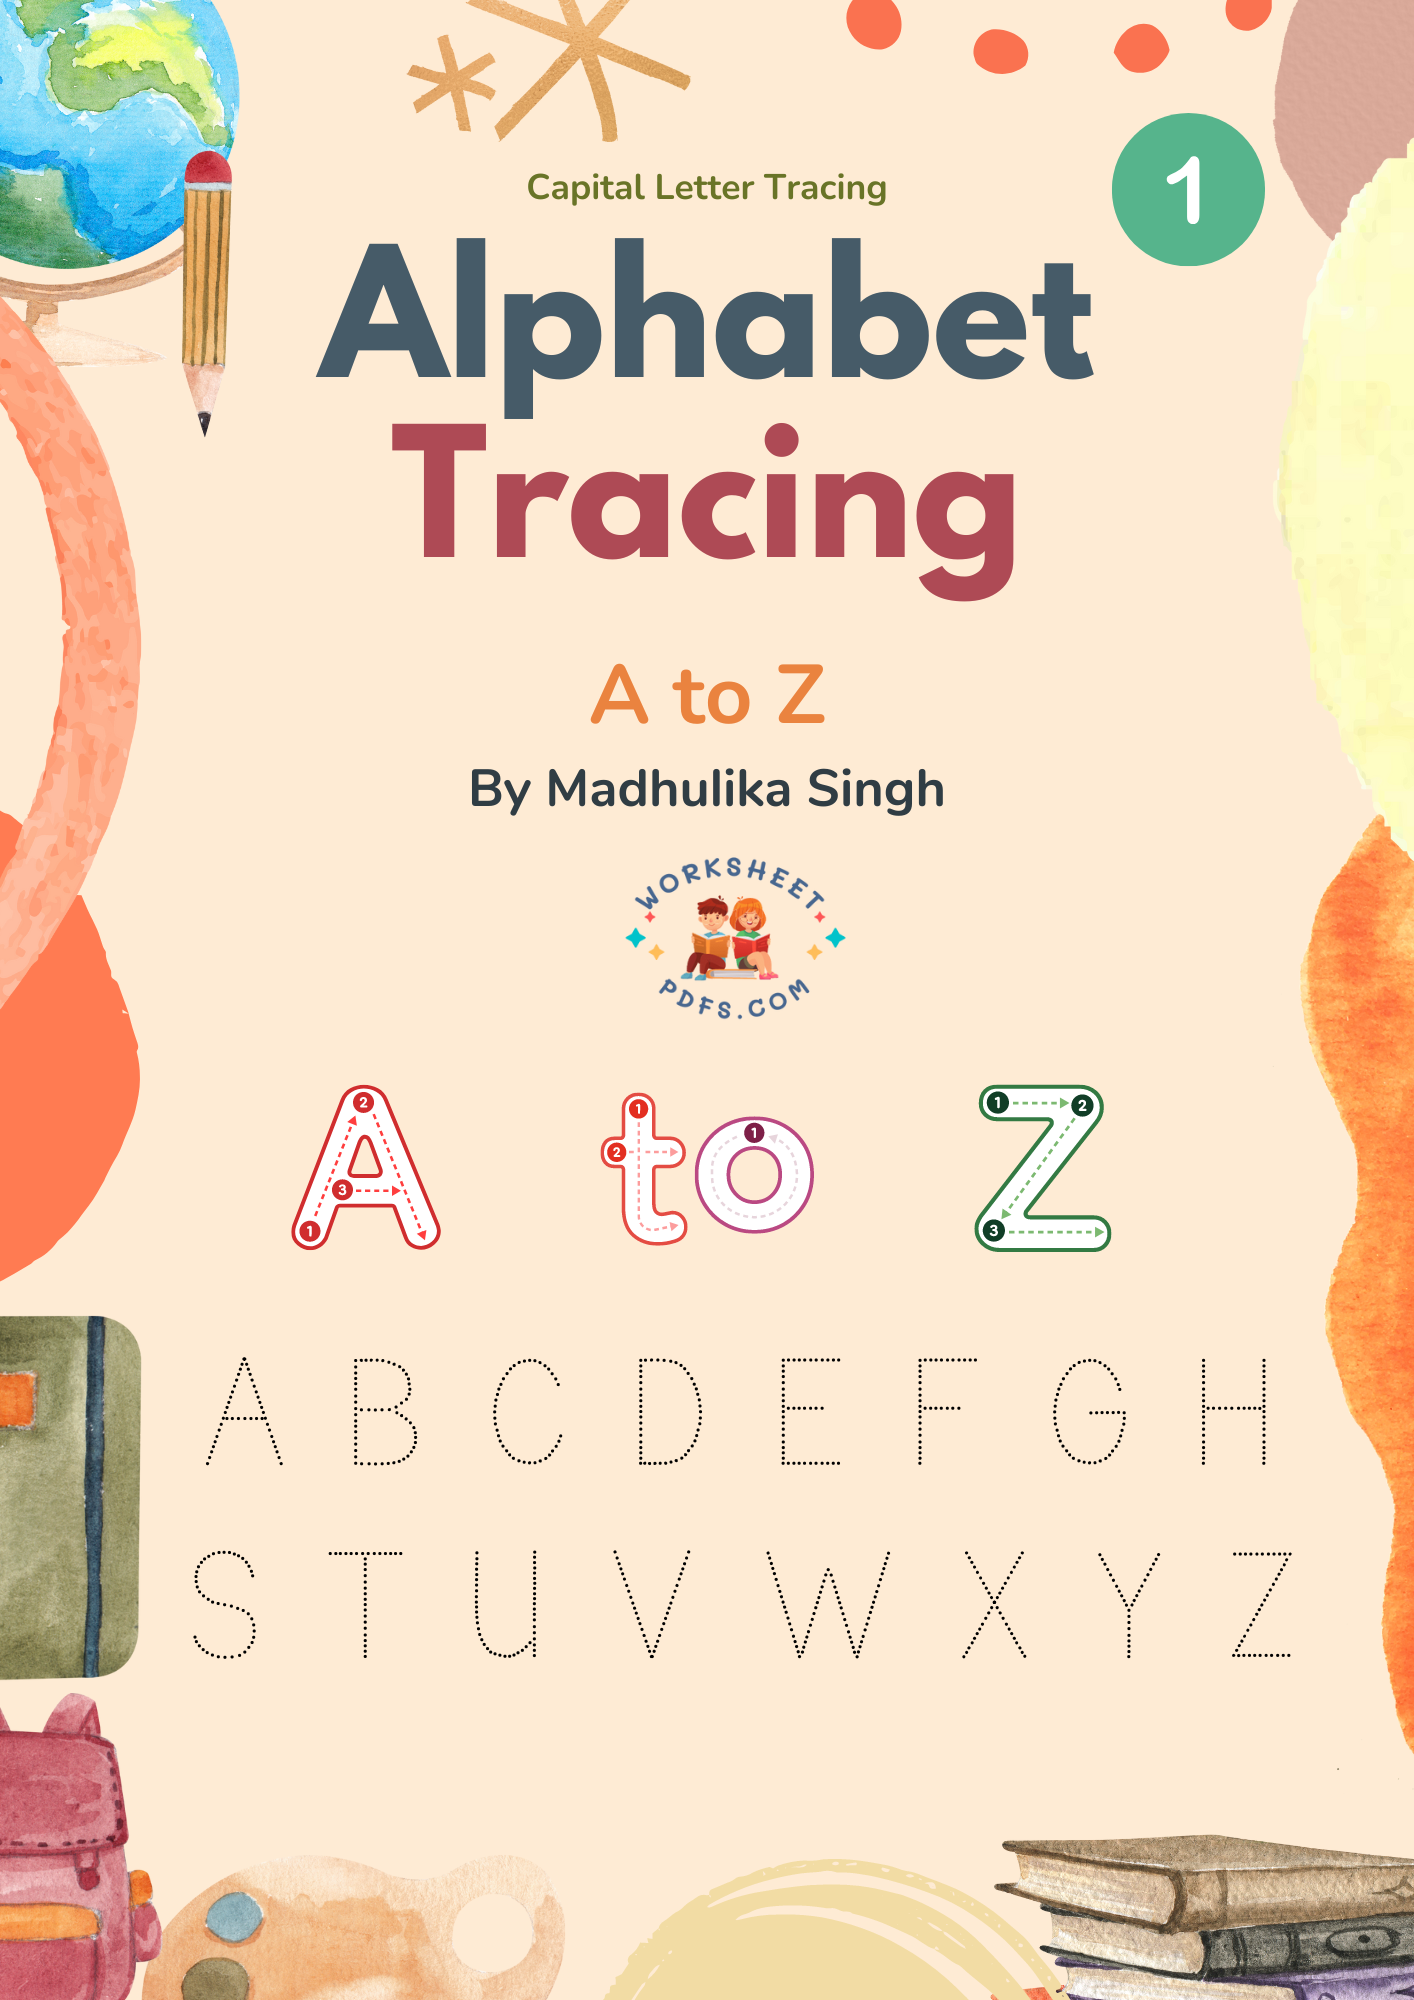 A to Z  Capital letter tracing worksheets pdf